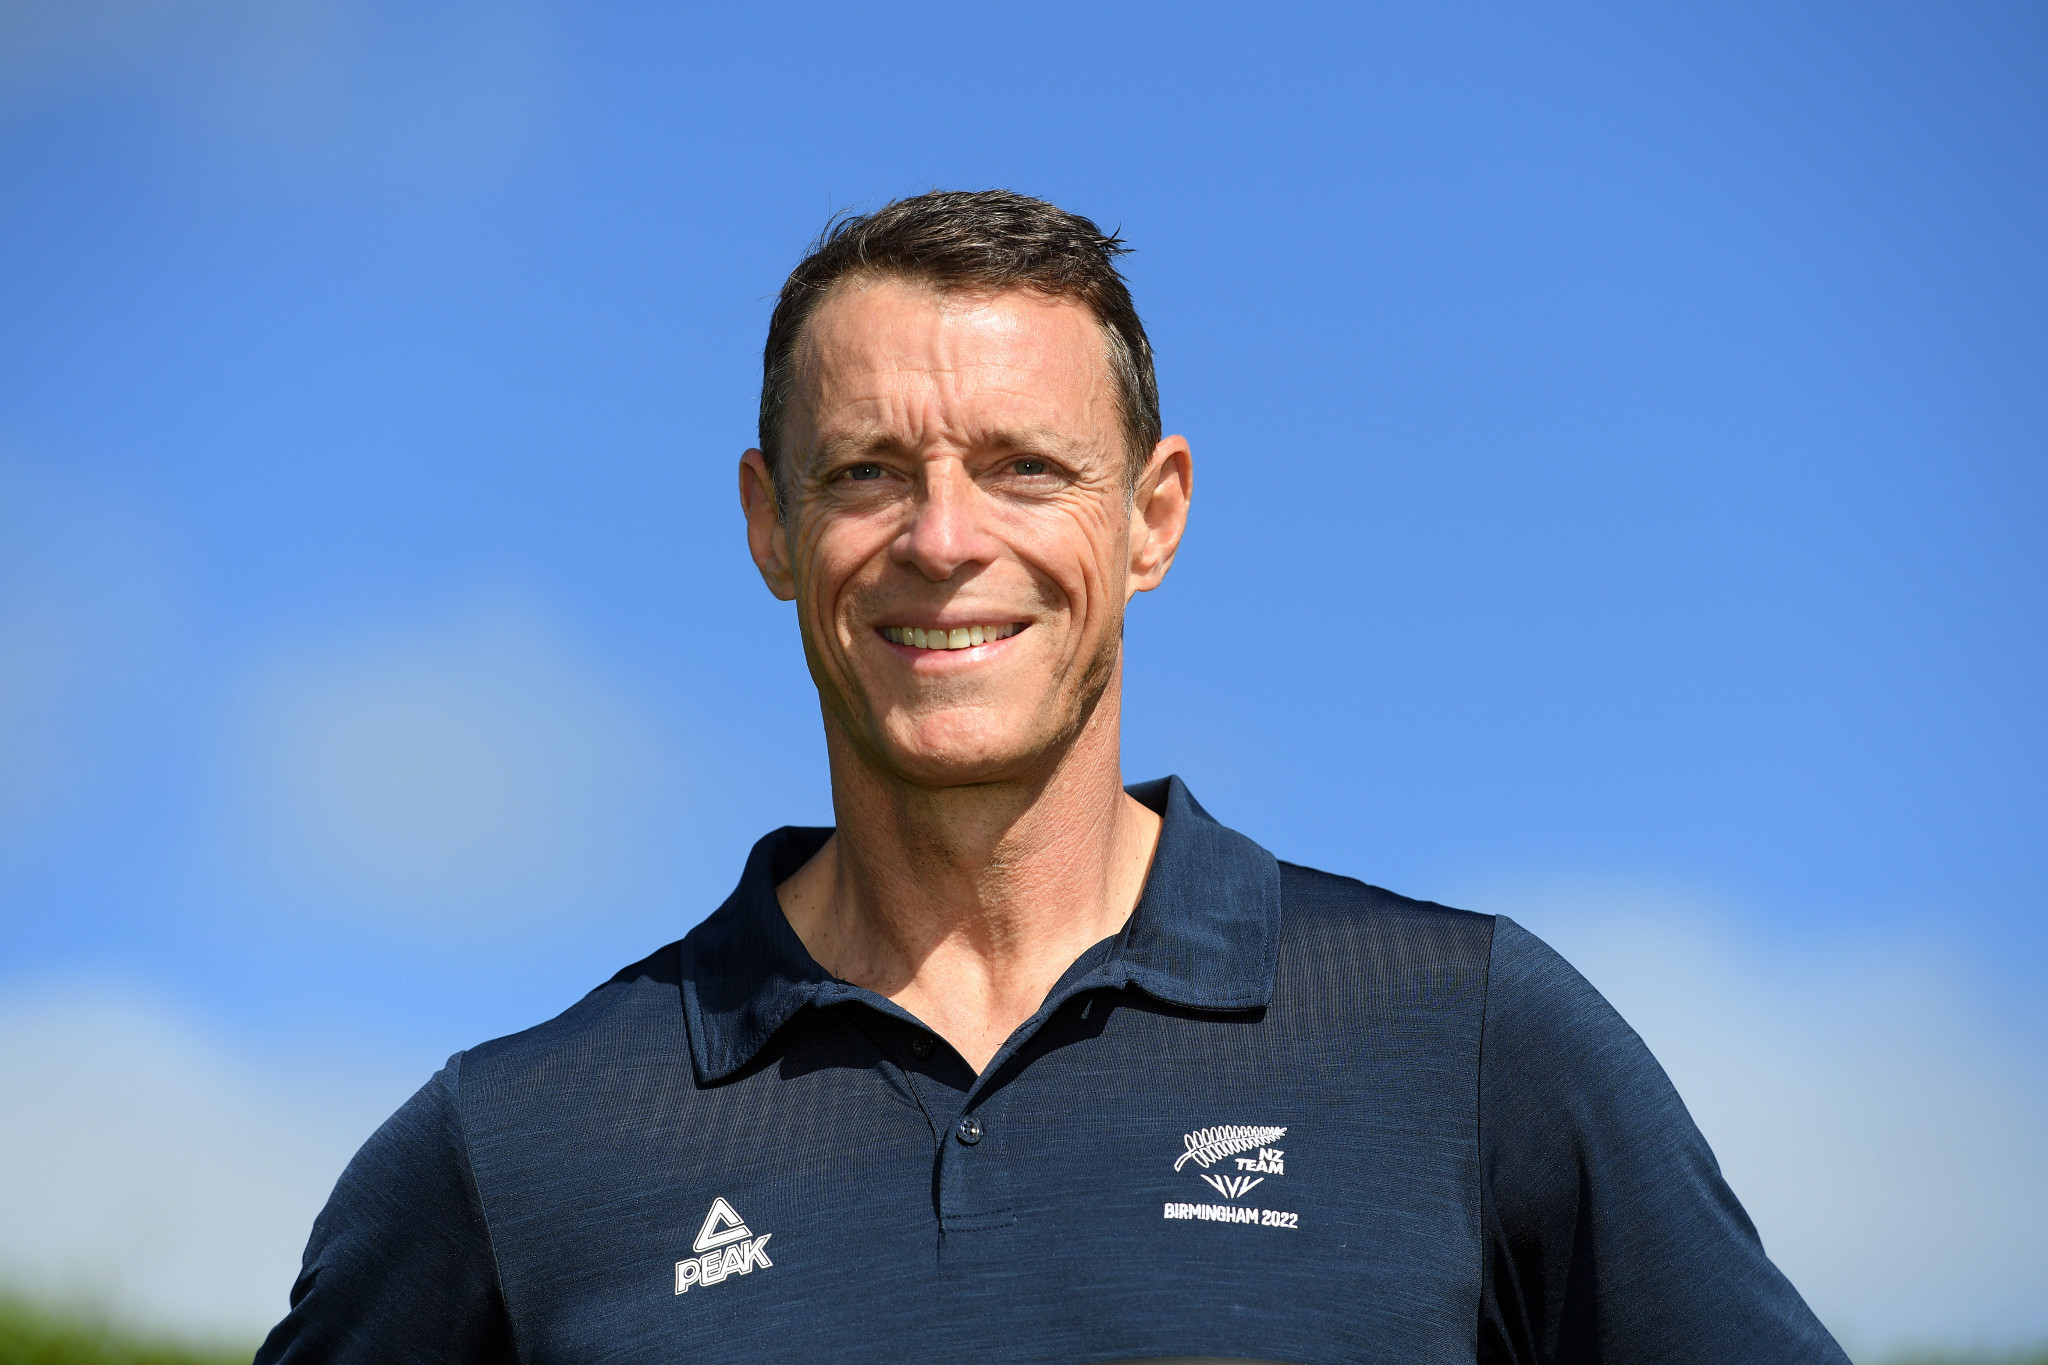 Avery named New Zealand's Chef de Mission for Paris 2024